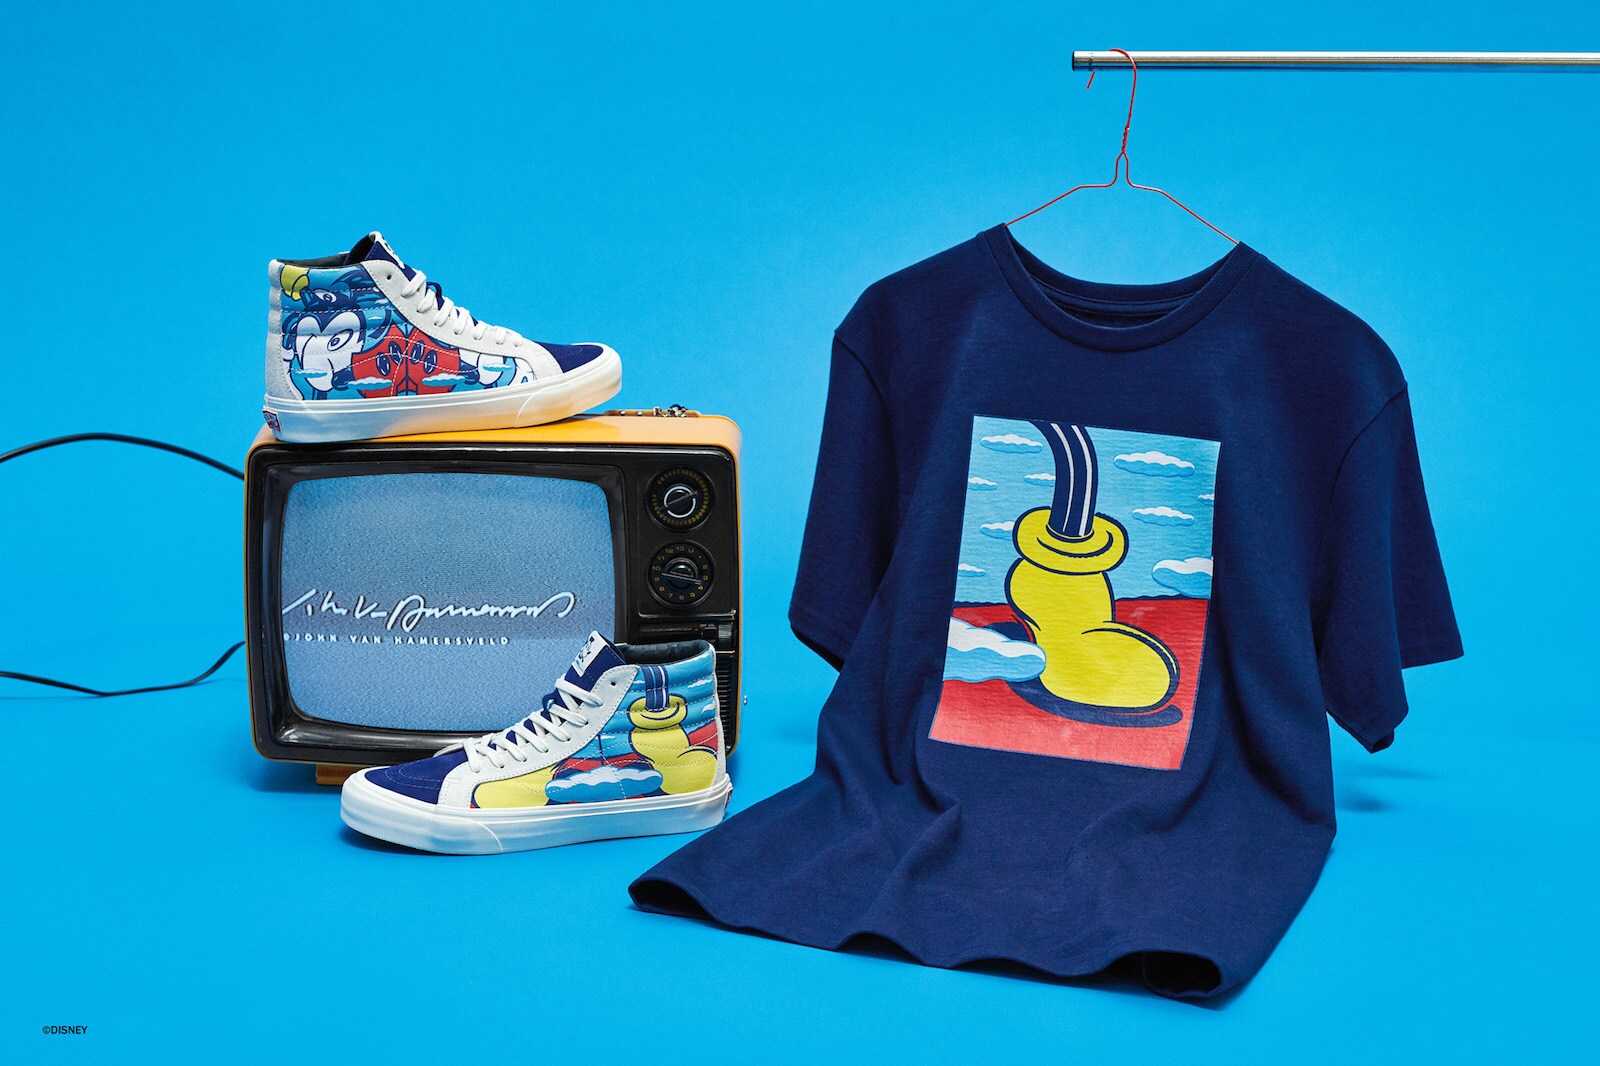  Sneakers and a tee shirt from the Vault by Vans Mickey Mouse collection